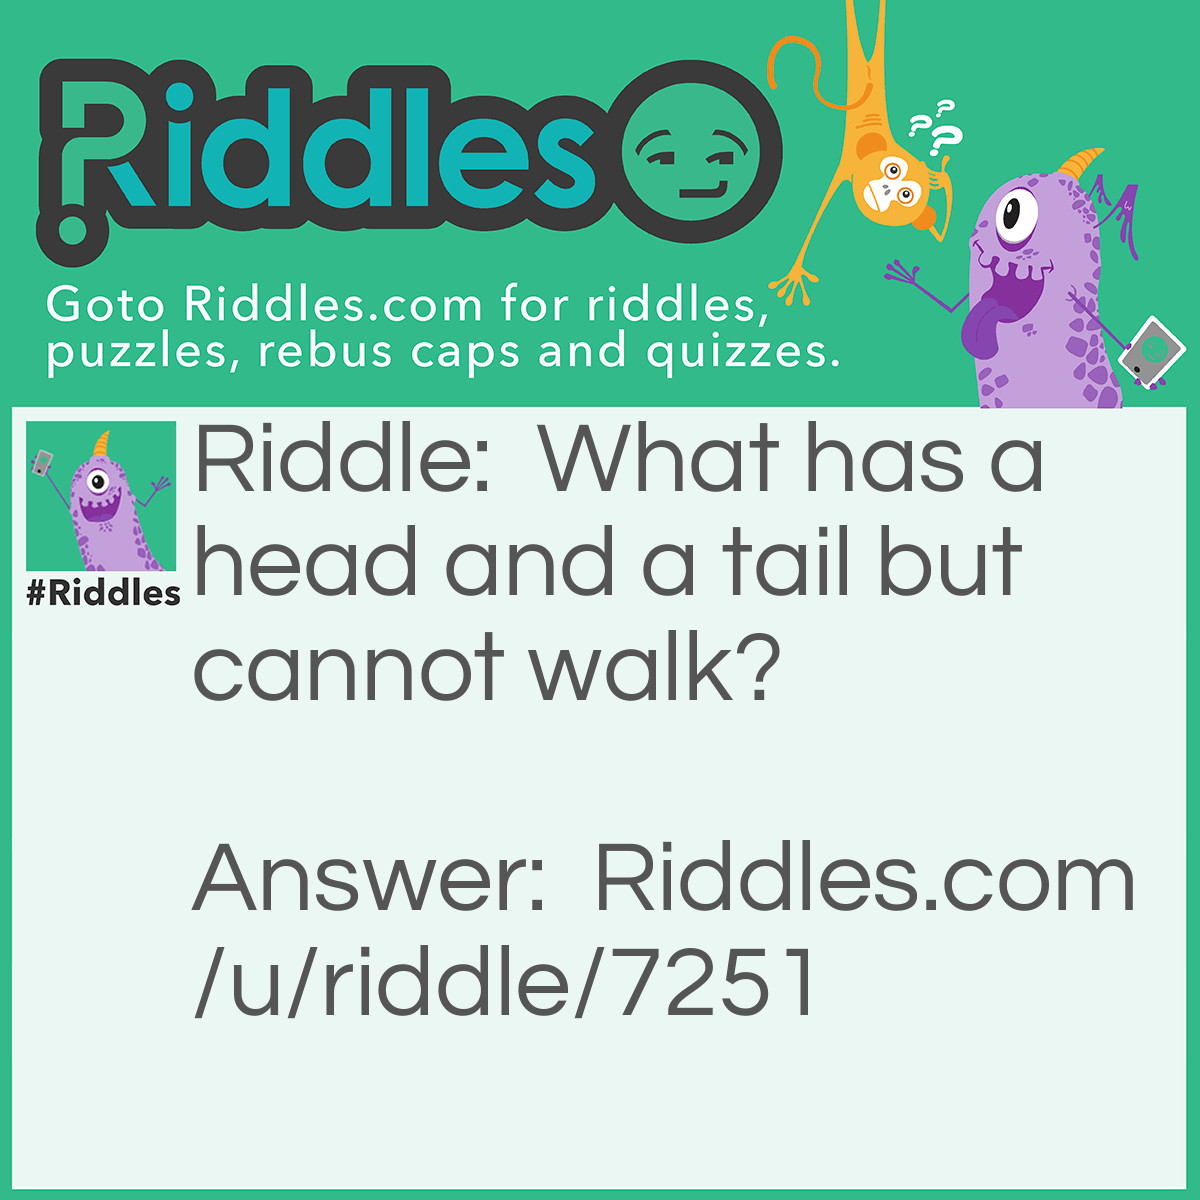 Riddle: What has a head and a tail but cannot walk? Answer: A coin.